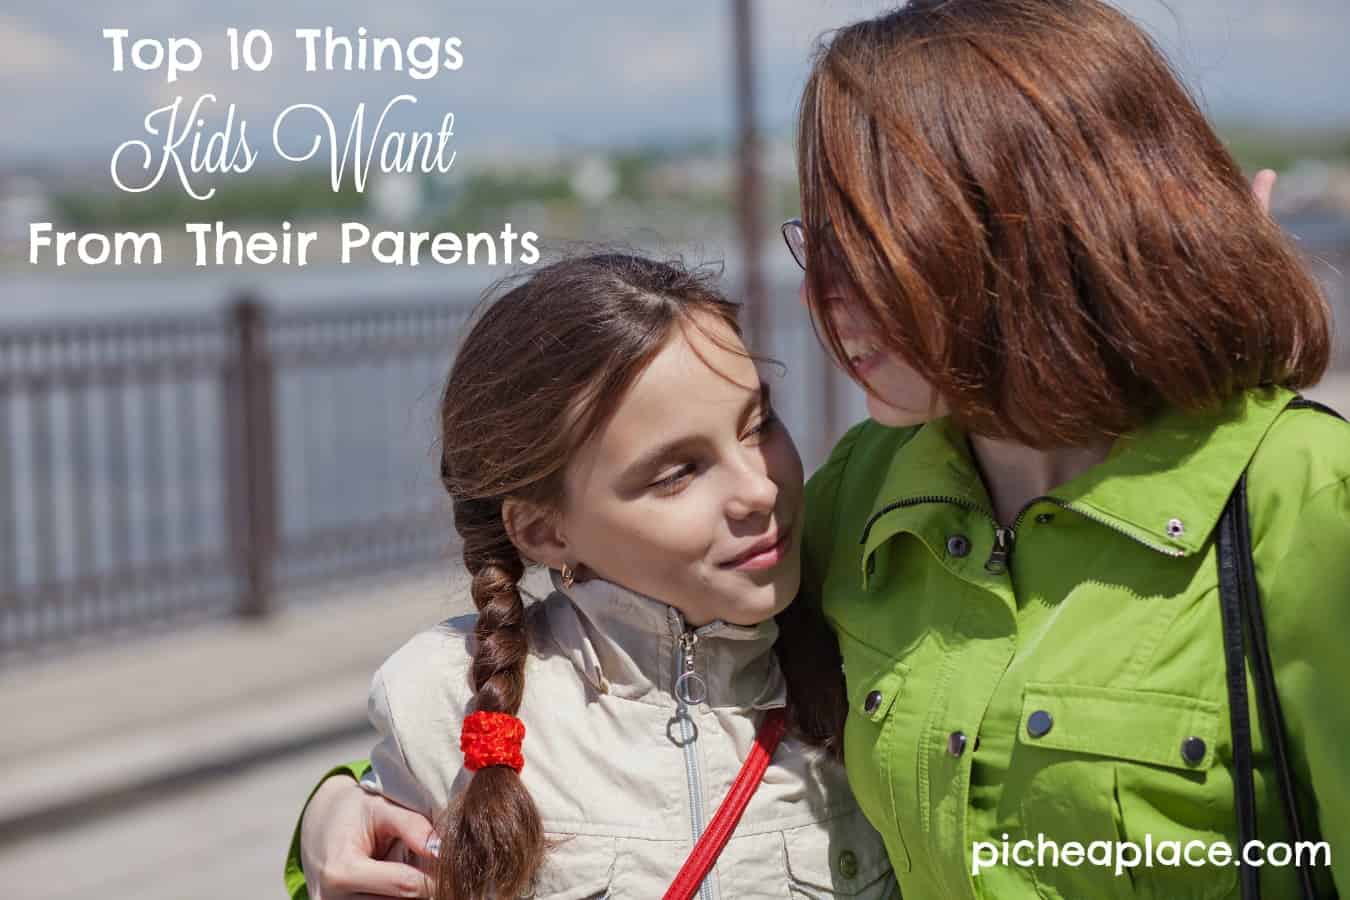 Top 10 Things Kids Want From Their Parents